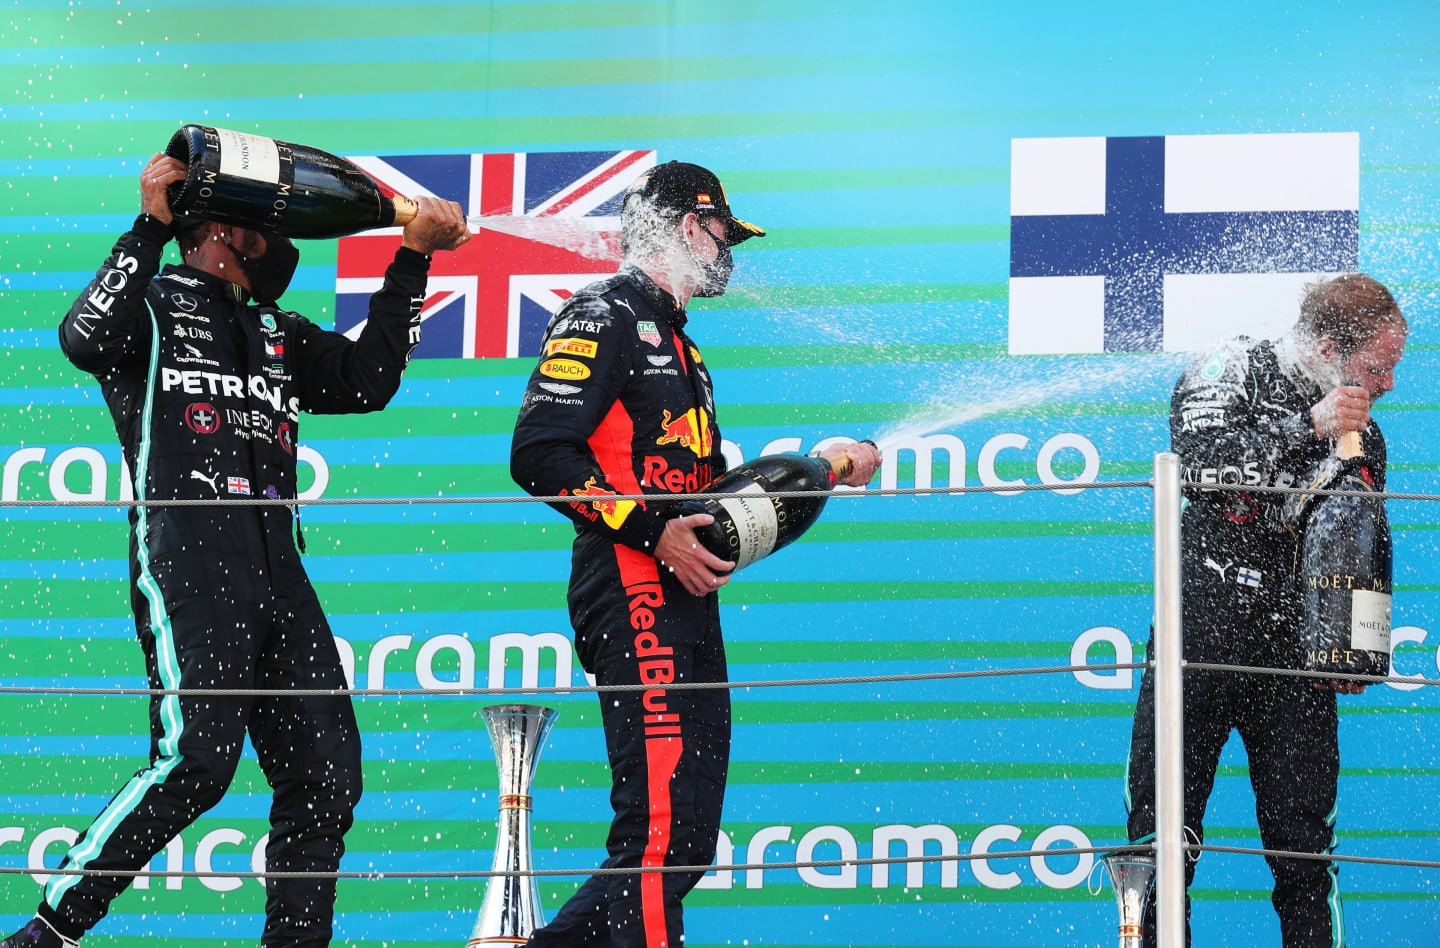 BARCELONA, SPAIN - AUGUST 16: Race winner Lewis Hamilton of Great Britain and Mercedes GP,  second placed Max Verstappen of Netherlands and Red Bull Racing and third placed Valtteri Bottas of Finland and Mercedes GP celebrate on the podium during the F1 Grand Prix of Spain at Circuit de Barcelona-Catalunya on August 16, 2020 in Barcelona, Spain. (Photo by Albert Gea/Pool via Getty Images)